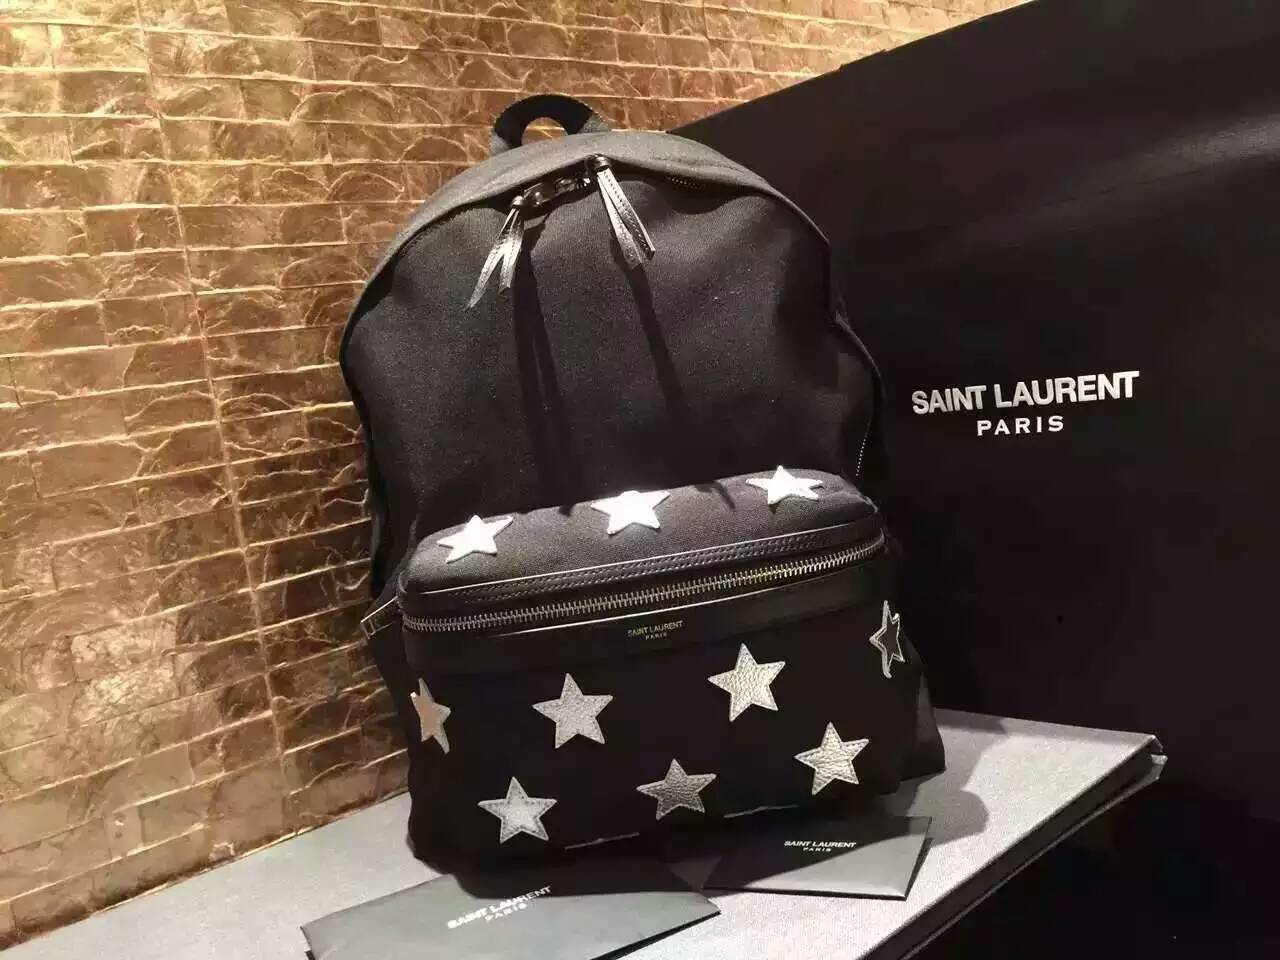 2016 Saint Laurent Bags Cheap Sale-Saint Laurent Classic Hunting California Backpack in Black Nylon and Silver Metallic Leather